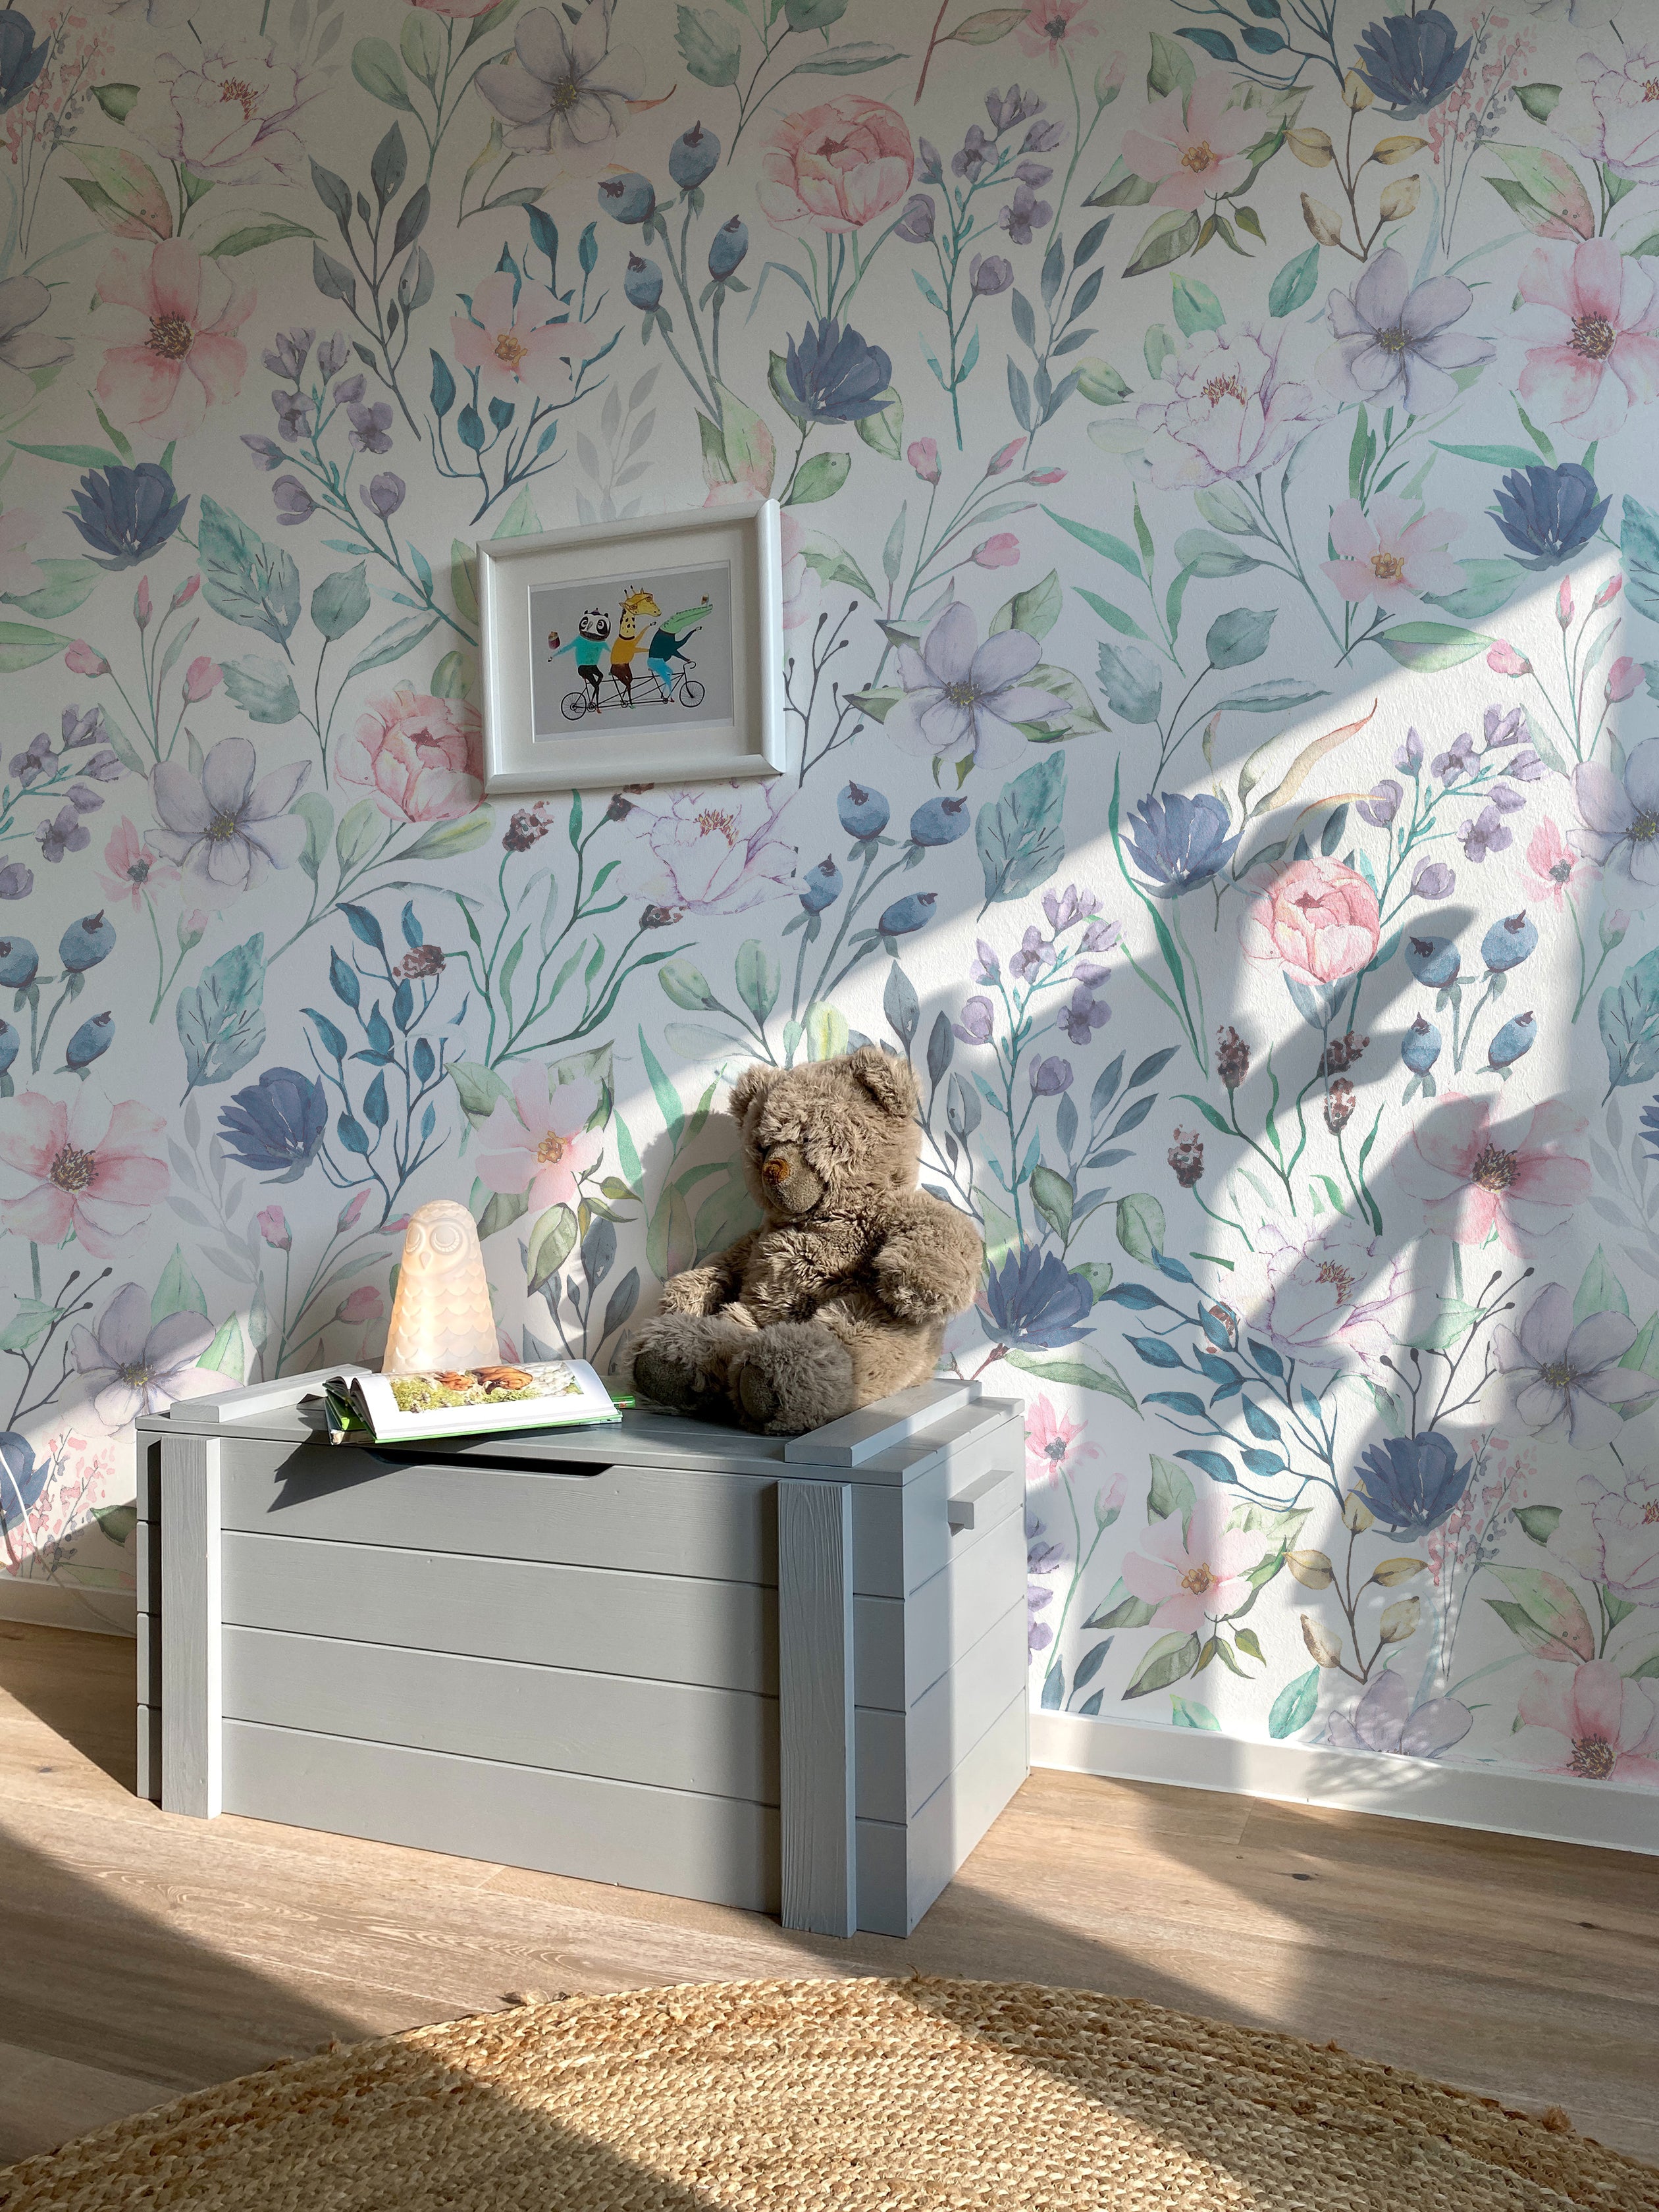 The wallpaper is installed in a child's room, creating a serene and inviting atmosphere with its delicate floral design. A teddy bear sits on a grey toy chest in front of the wallpaper.